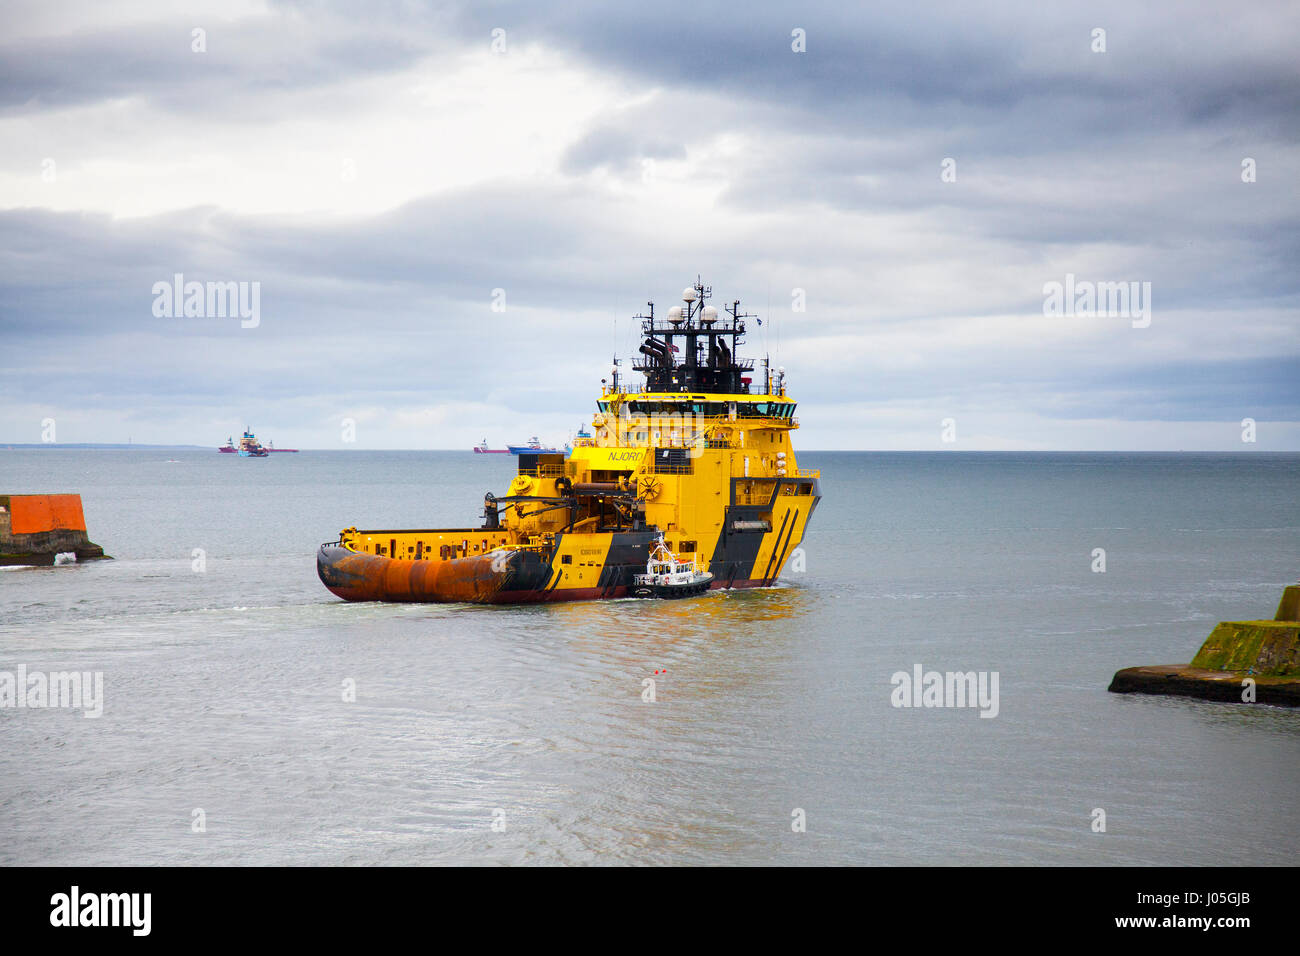 Aberdeen, Scotland, UK. 11th Apr, 2017. UK Weather. Cloudy overcast with light rain and gales expected as Njord Viking a TUG SUPPLY VESSEL leaves Aberdeen harbour for the north sea oilrigs. The Njord Viking  Offshore Supply Ship is a High Ice-classed AHTS vessel capable of operations in harsh environment offshore regions, as well as Arctic/Sub-Arctic operations. Credit: MediaWorldImages/Alamy Live News Stock Photo